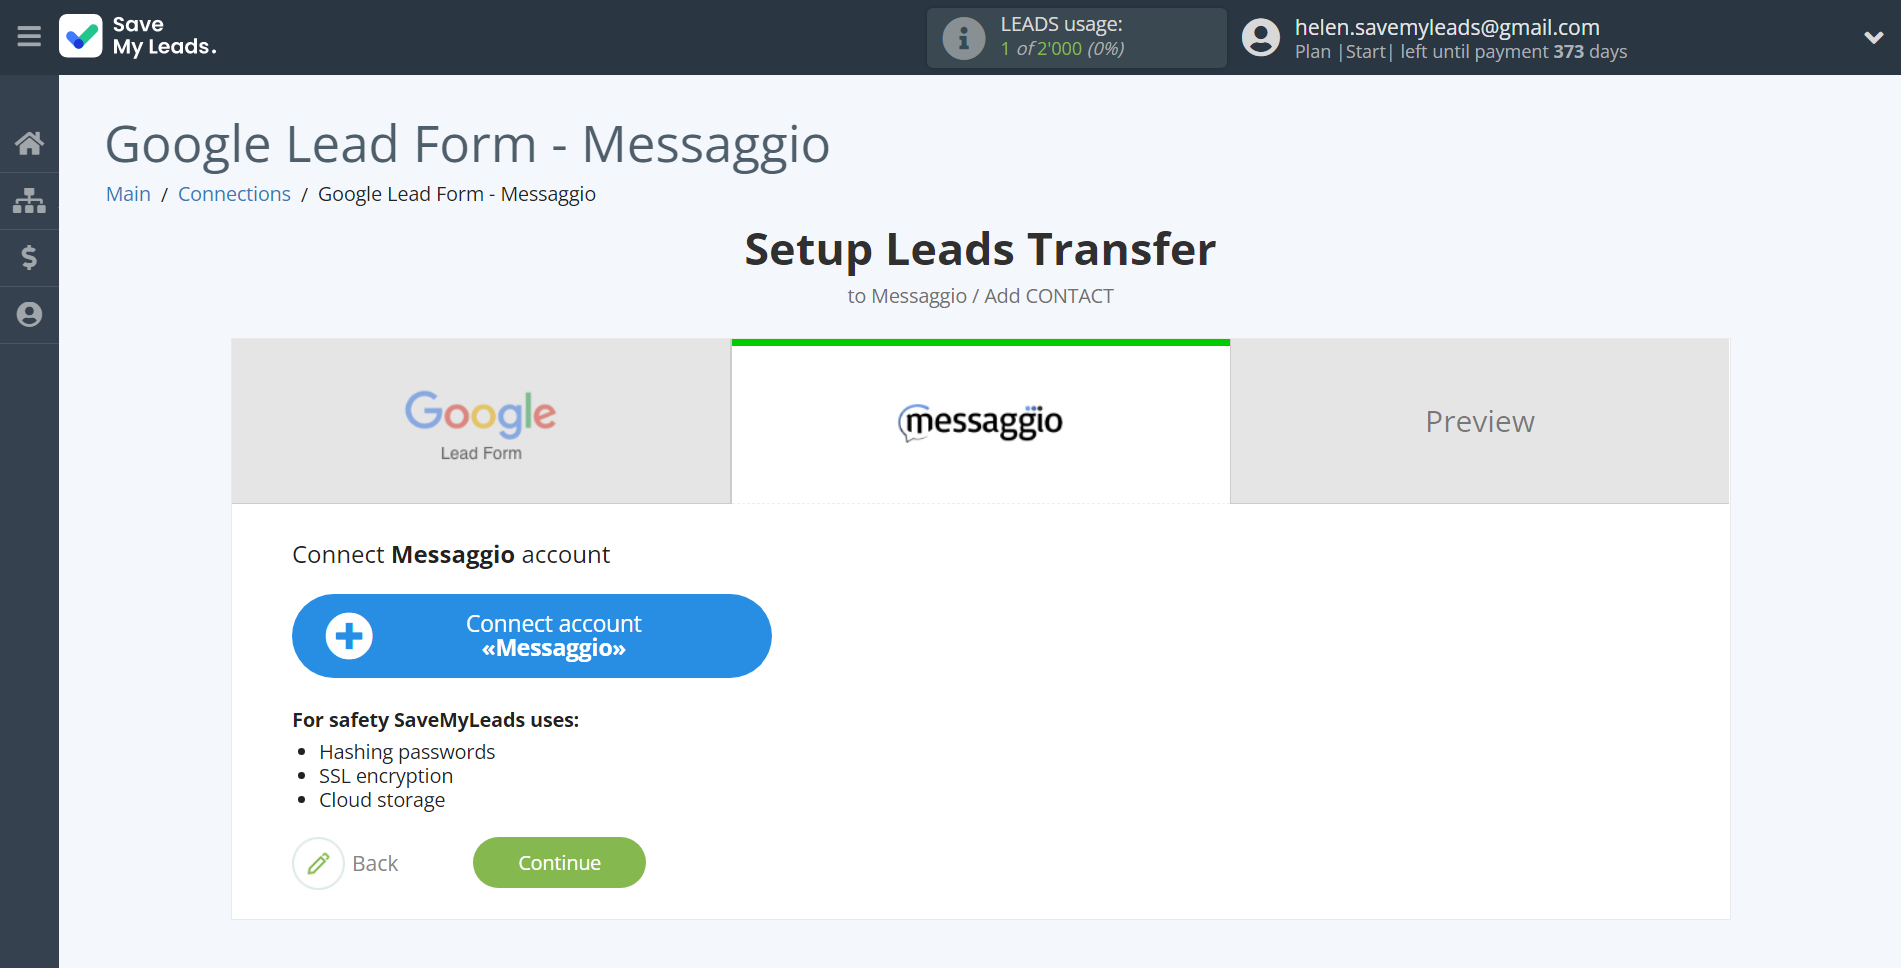 How to Connect Google Lead Form with Messaggio | Data Destination account connection